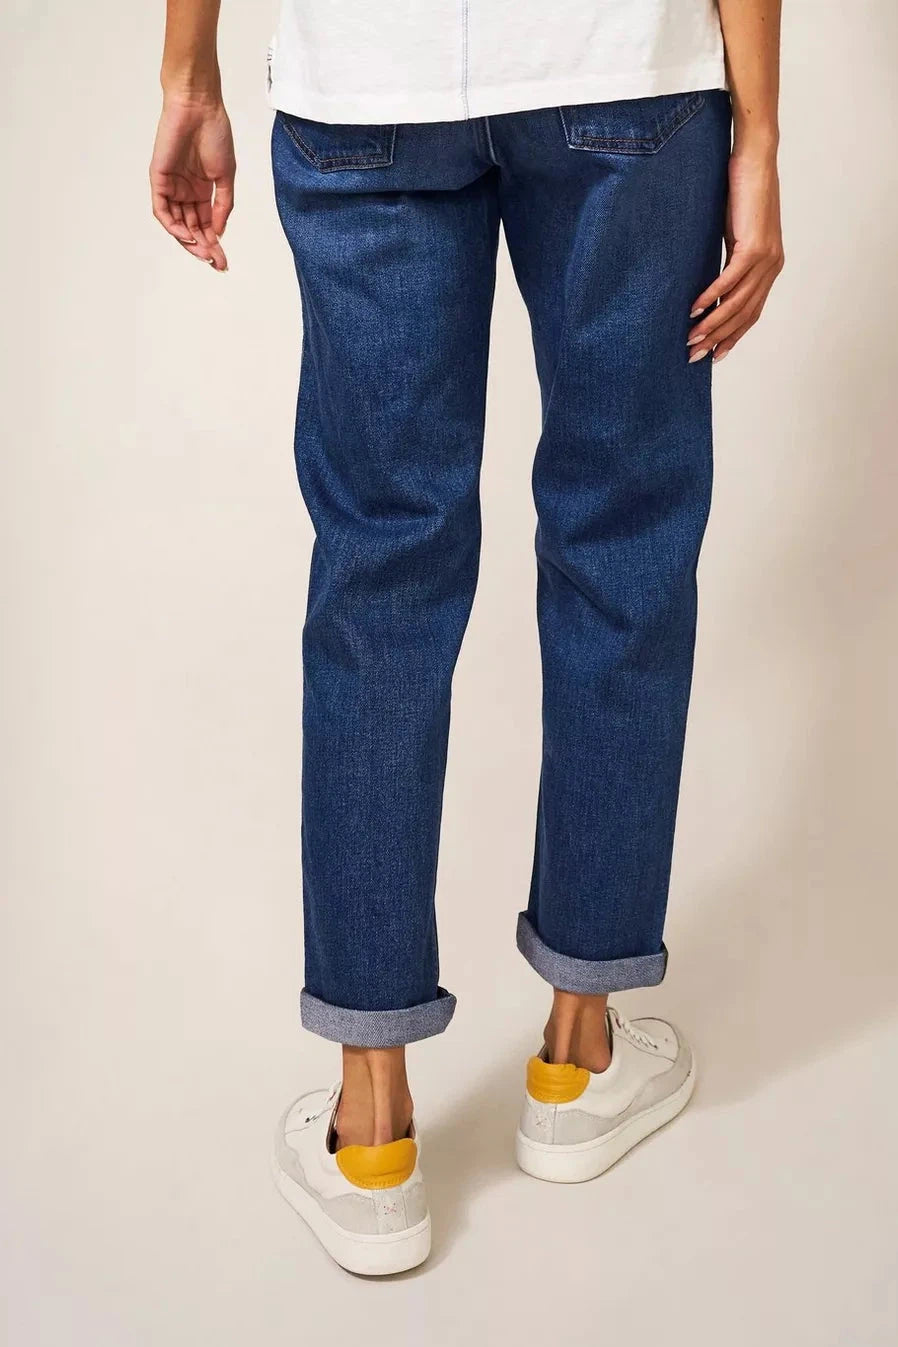 White Stuff Katy Relaxed Slim Jean in Mid Denim-Womens-Ohh! By Gum - Shop Sustainable